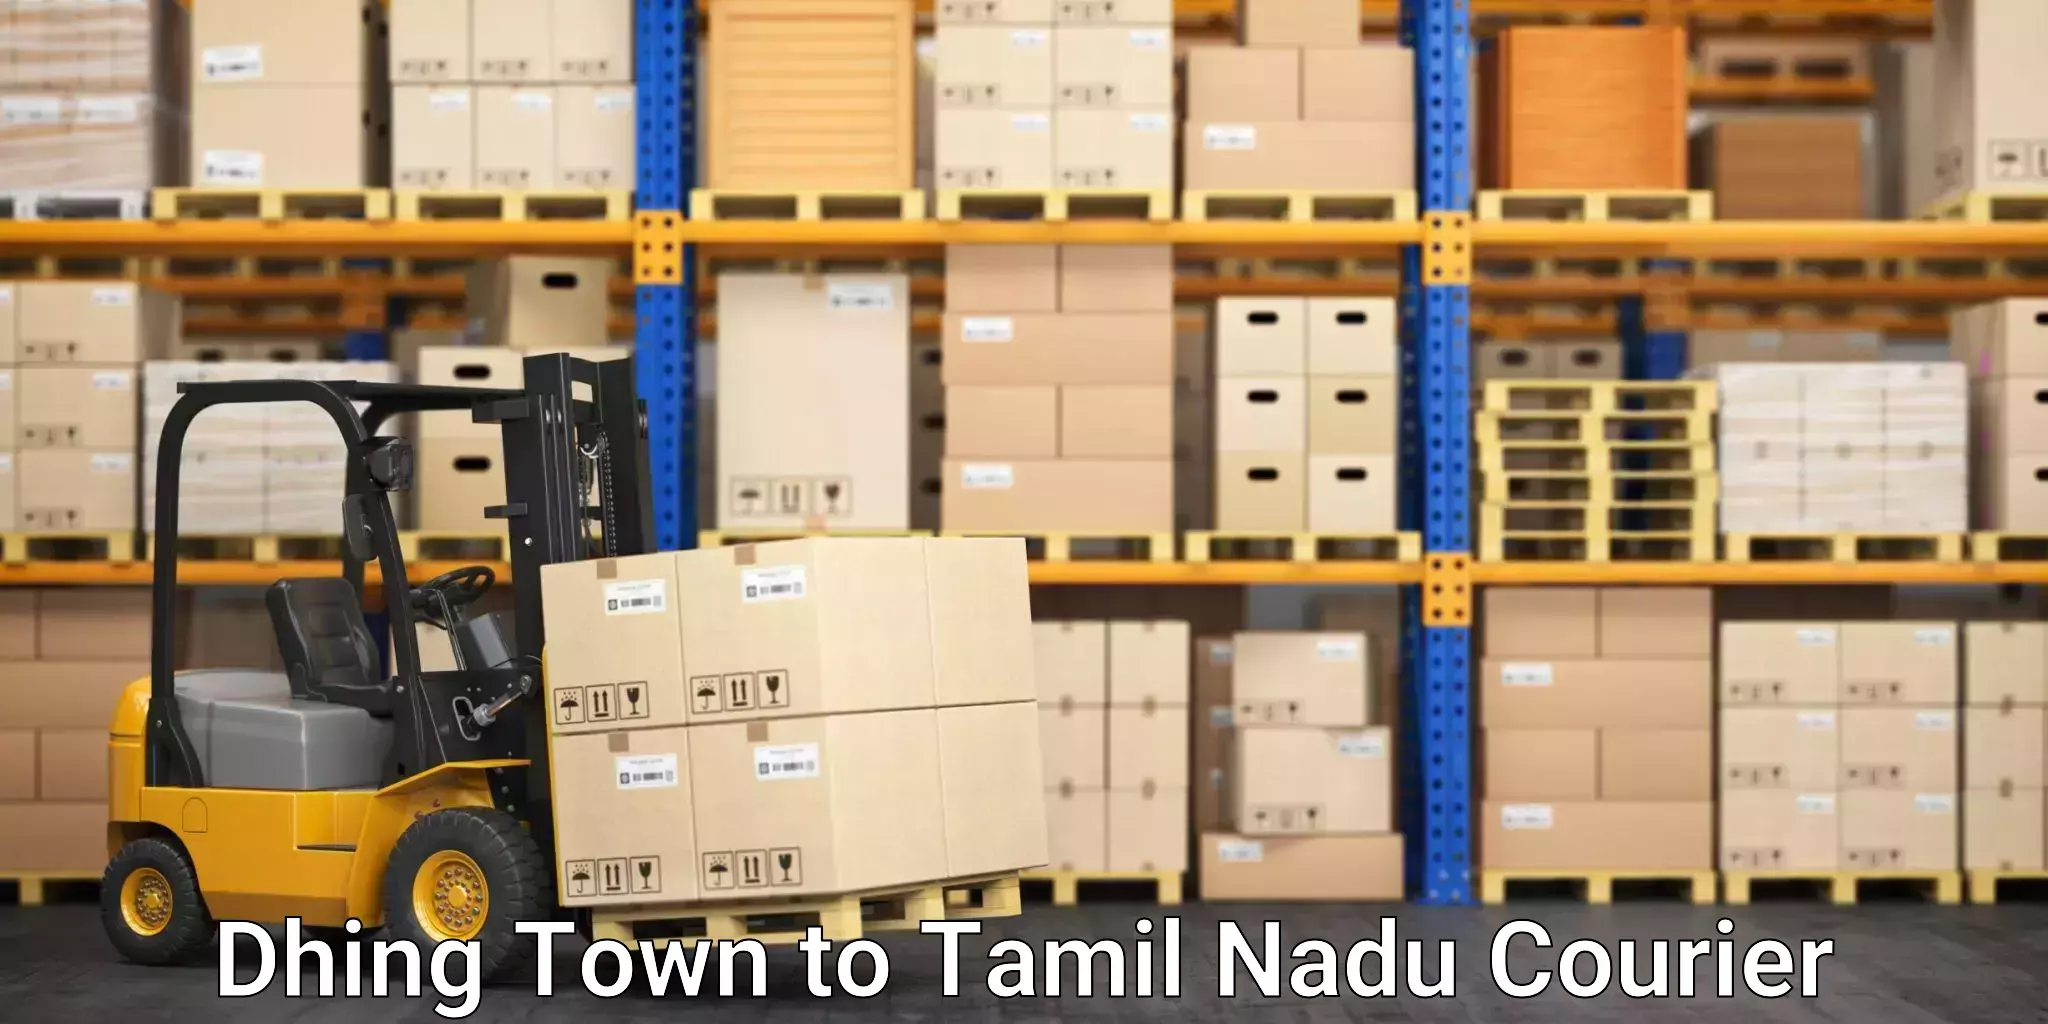 Integrated logistics solutions Dhing Town to Tamil Nadu